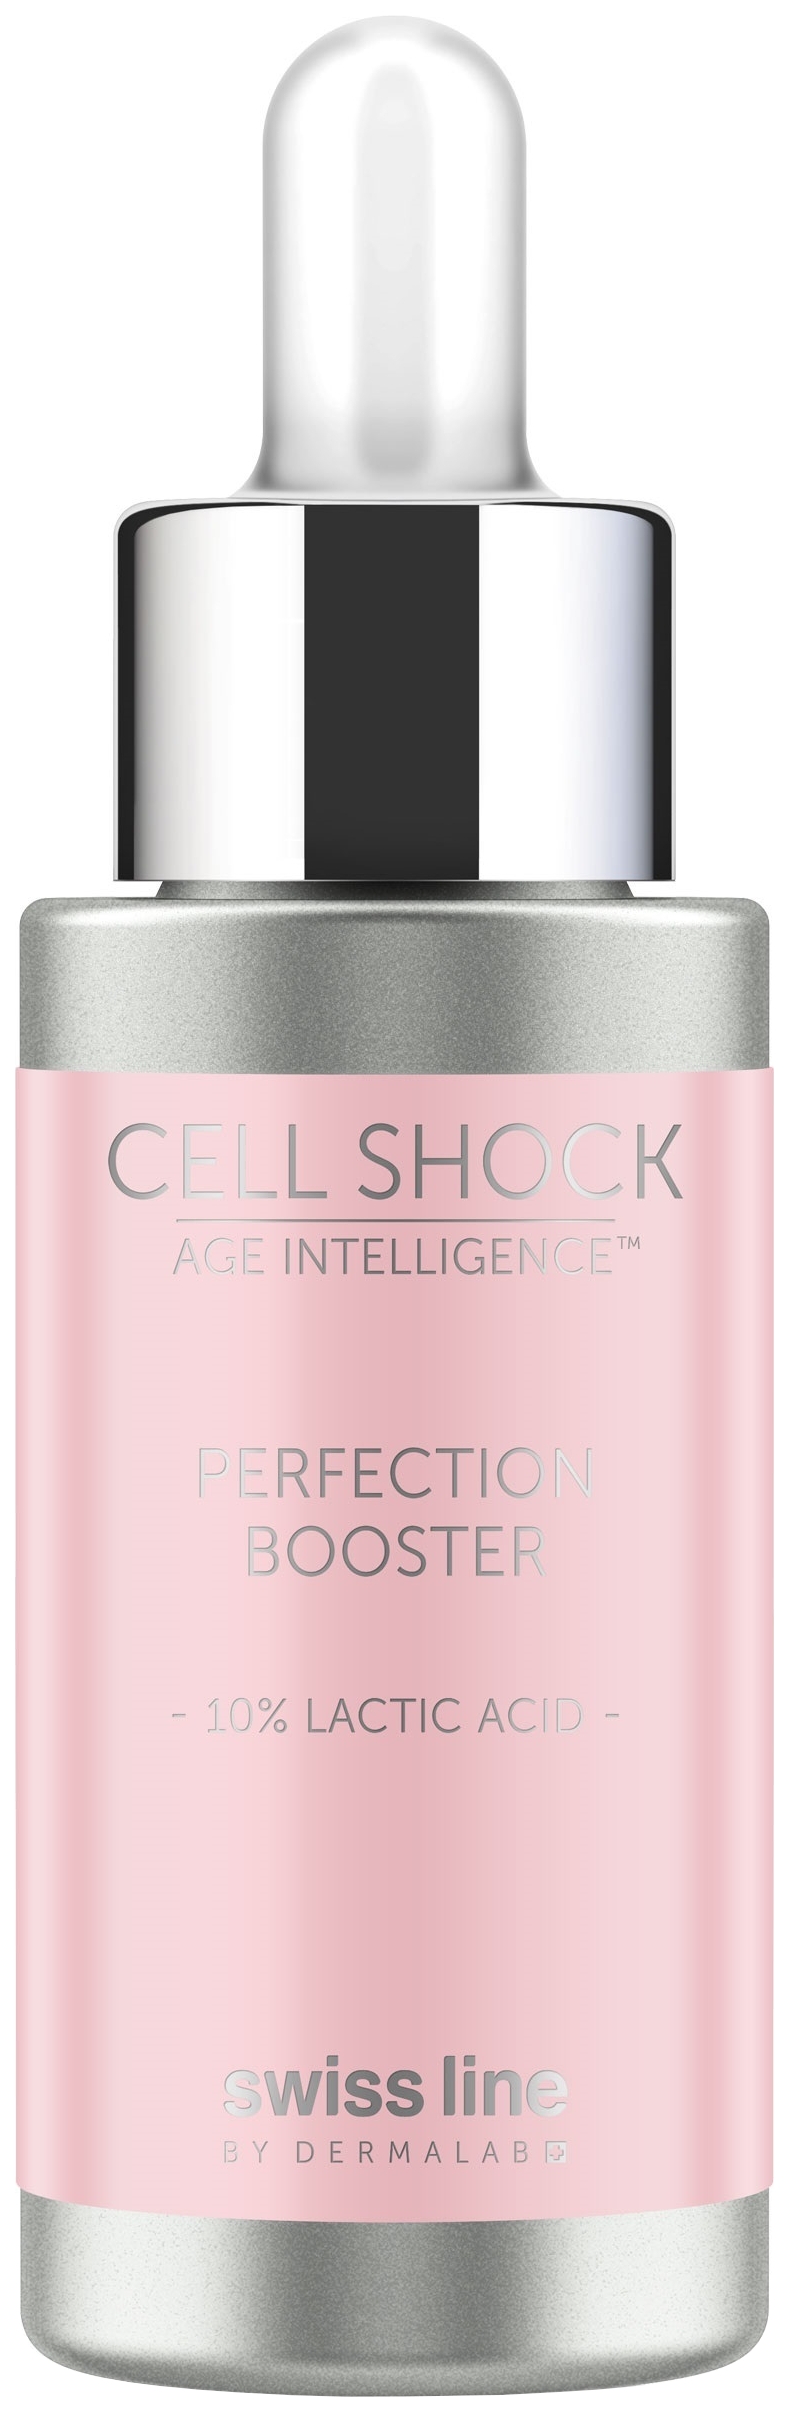 Сыворотка для лица Swiss Line Cell Shock Age Intelligence Perfection Booster 20 мл